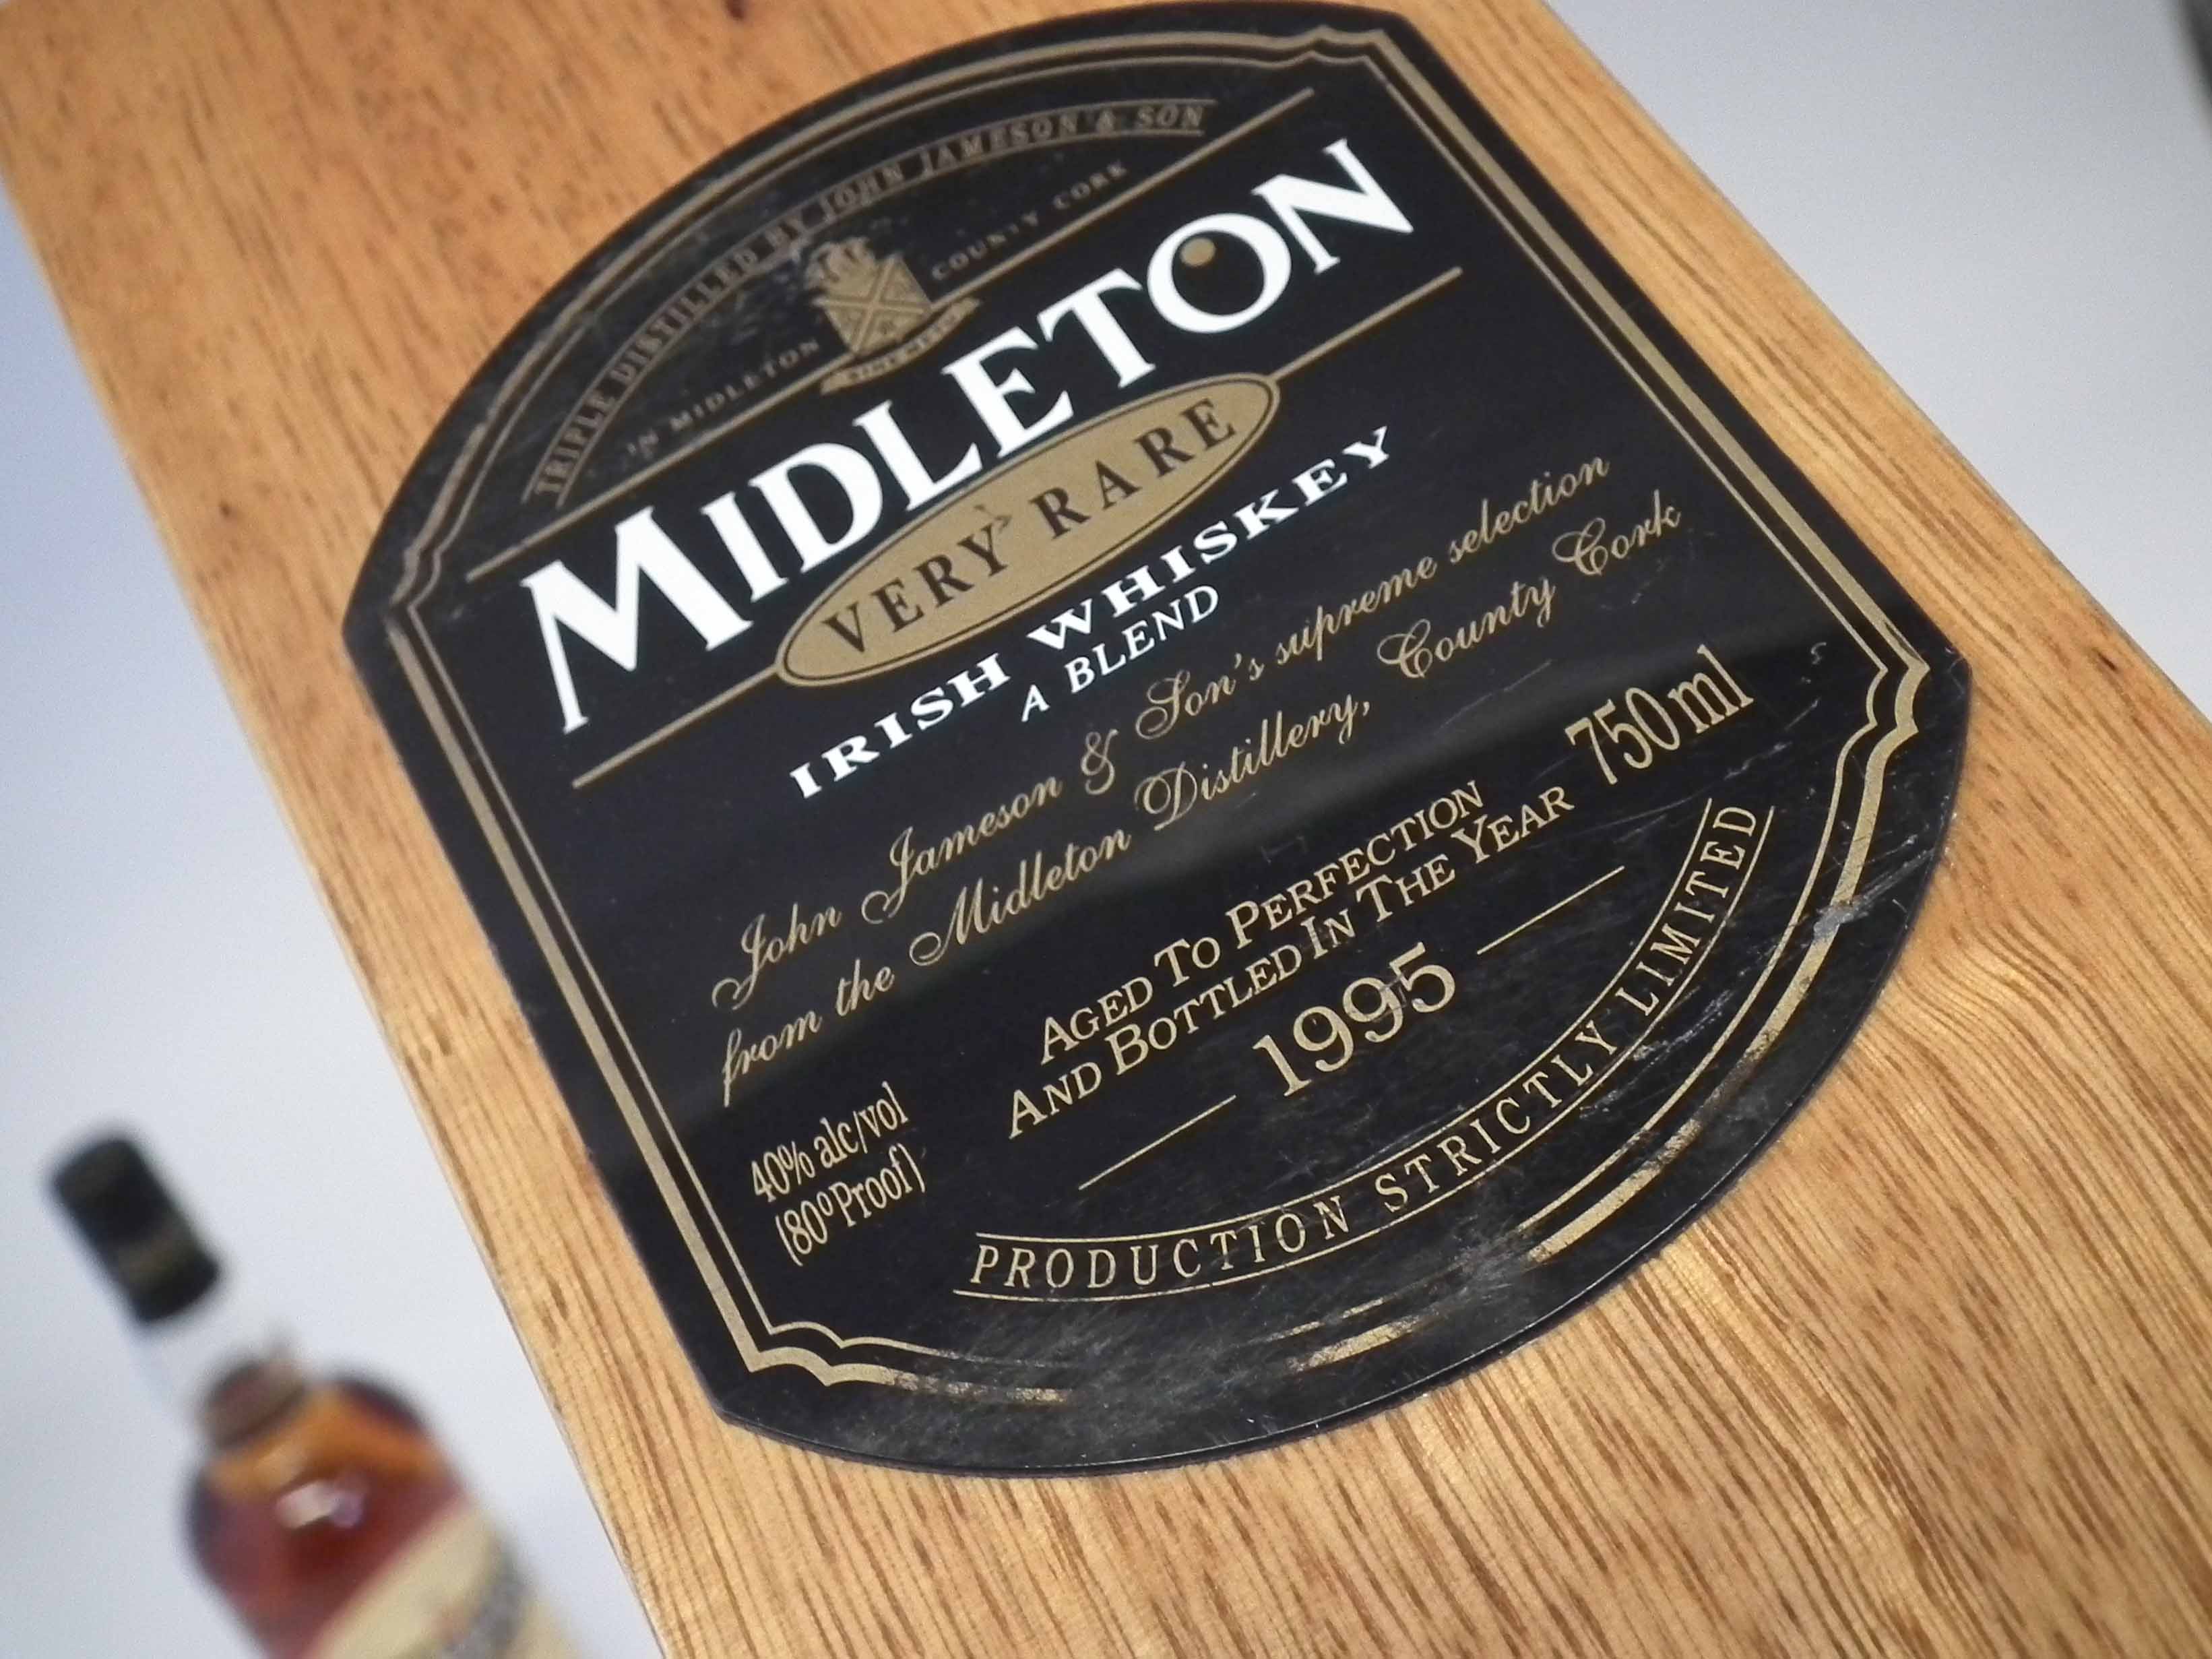 Midleton Very Rare Irish Whiskey - 1995 - 750ml number 12774 with wood box, certificate and - Image 5 of 6